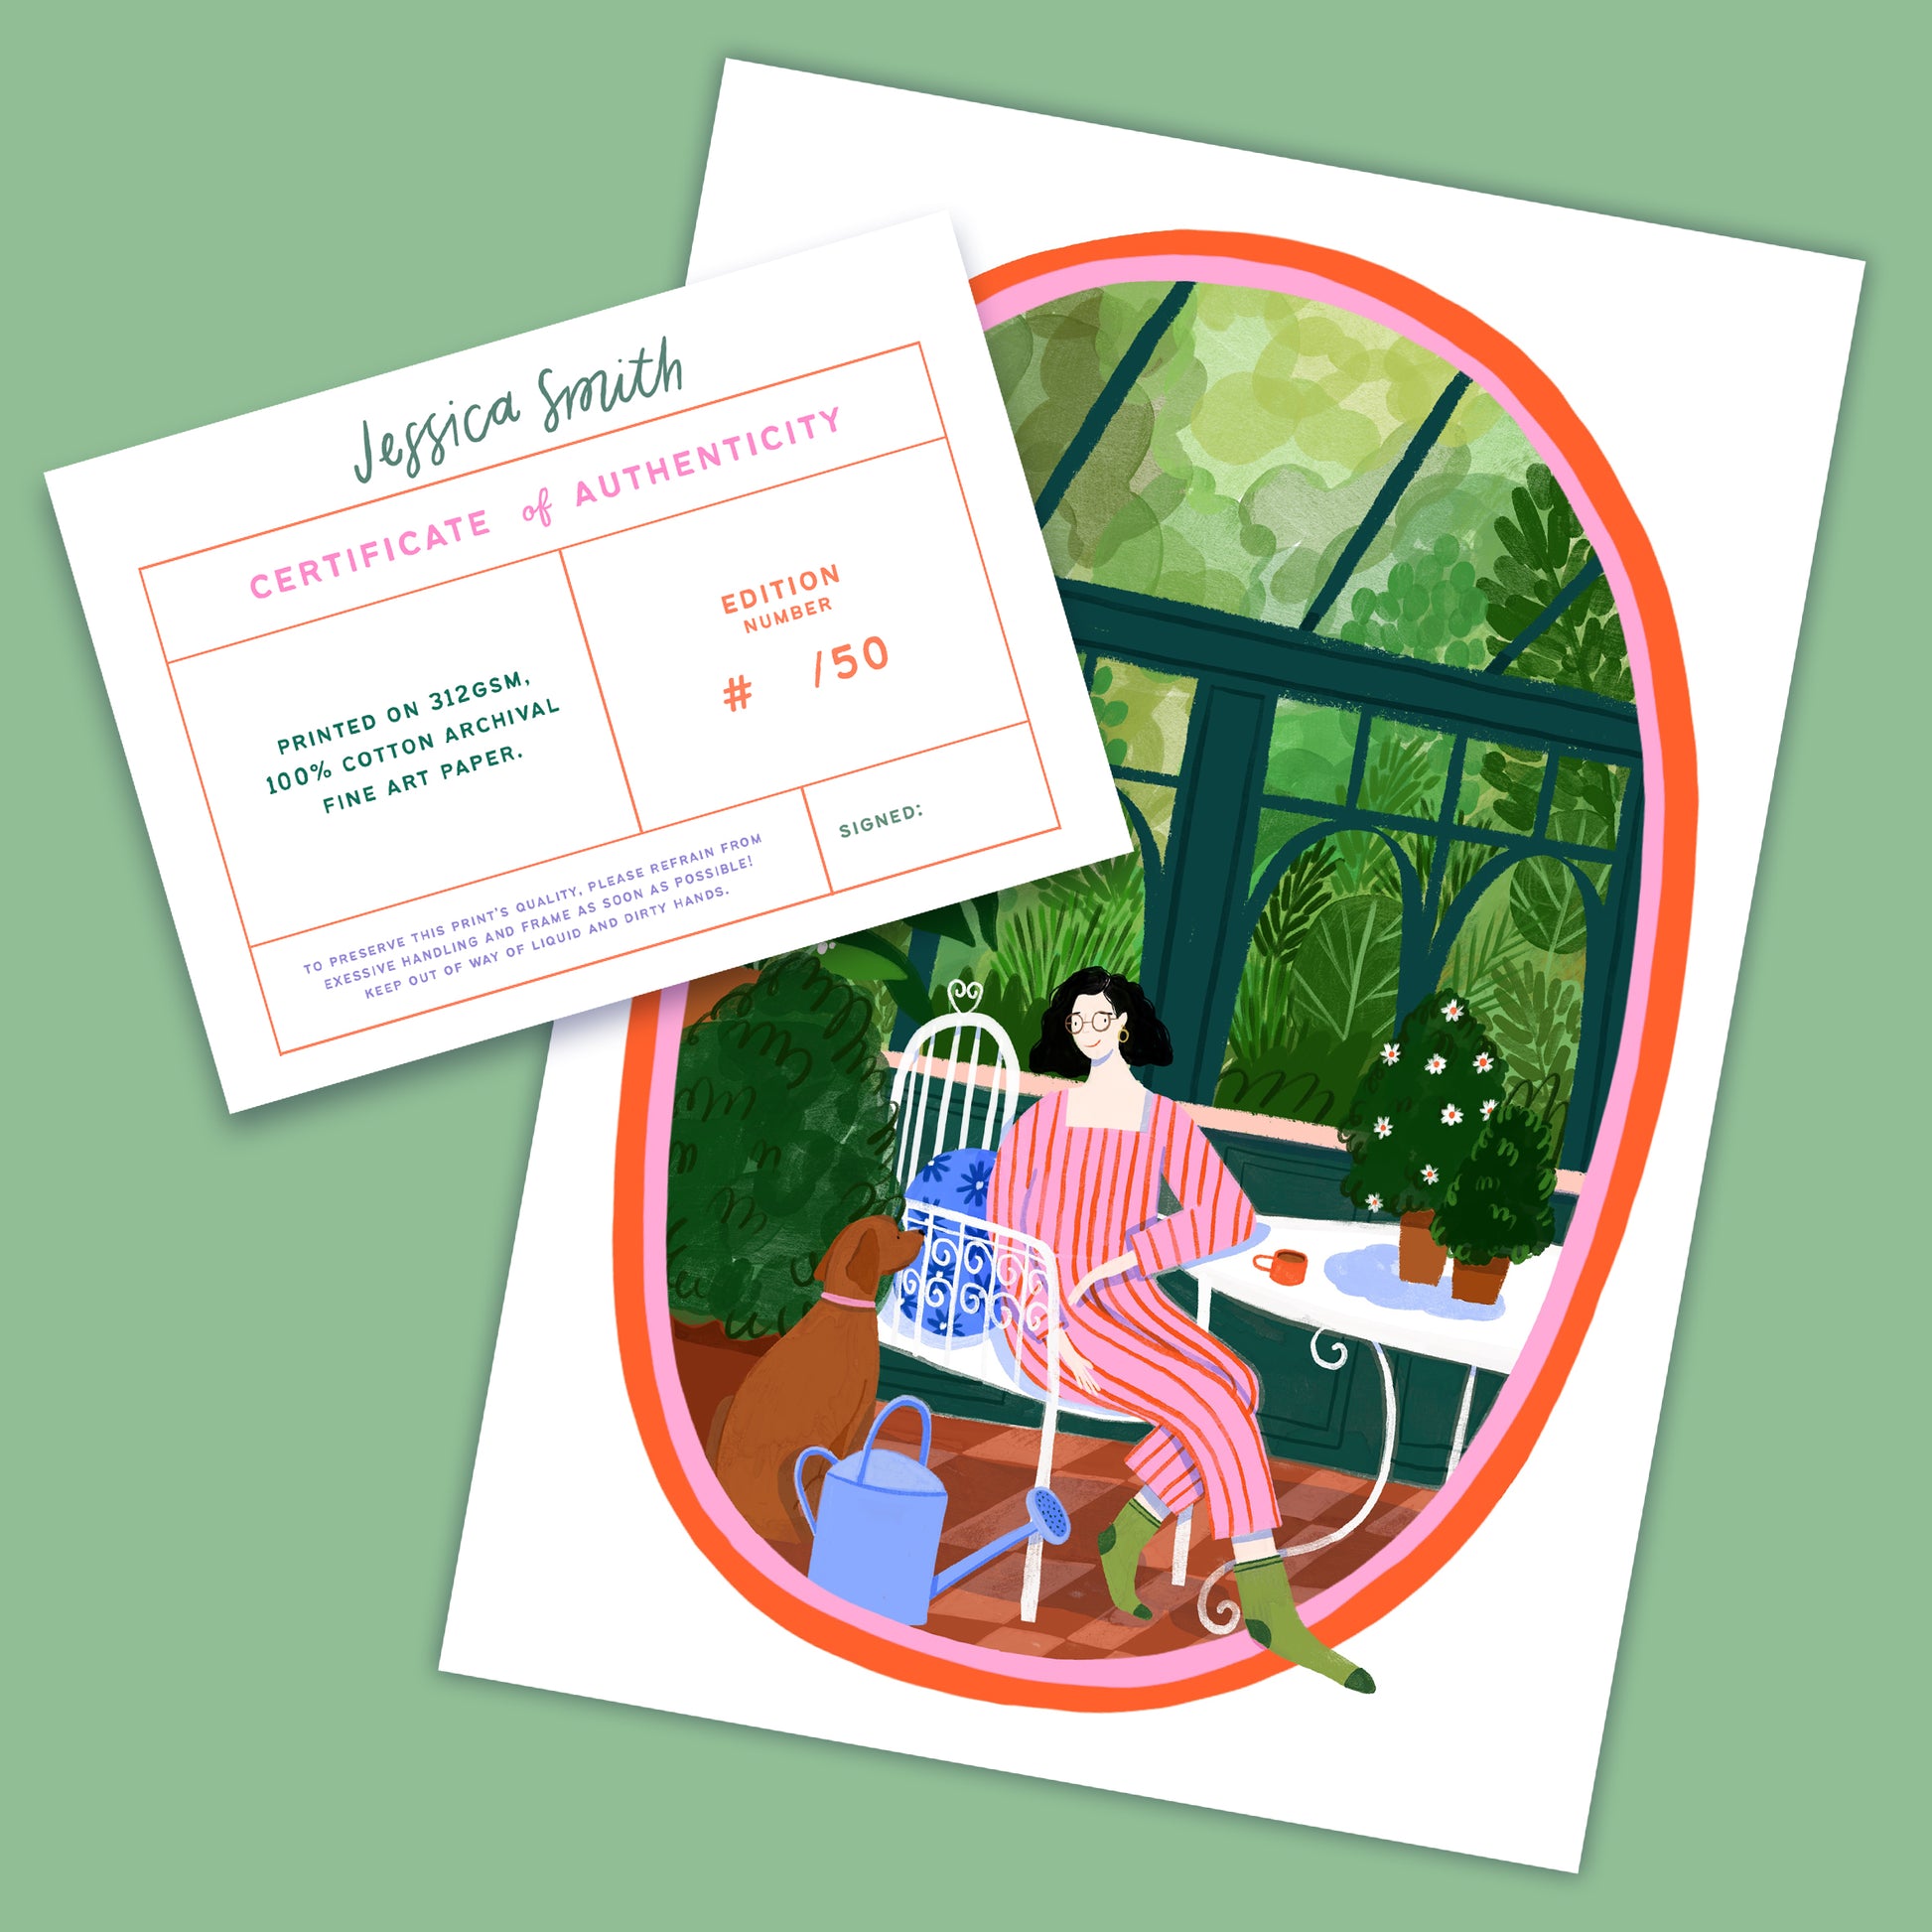 lady sitting in green house as a white ornate table and chair with her amber dog and blue watering can. there are lots of plants and the lady is wearing a pink and red striped jumpsuit